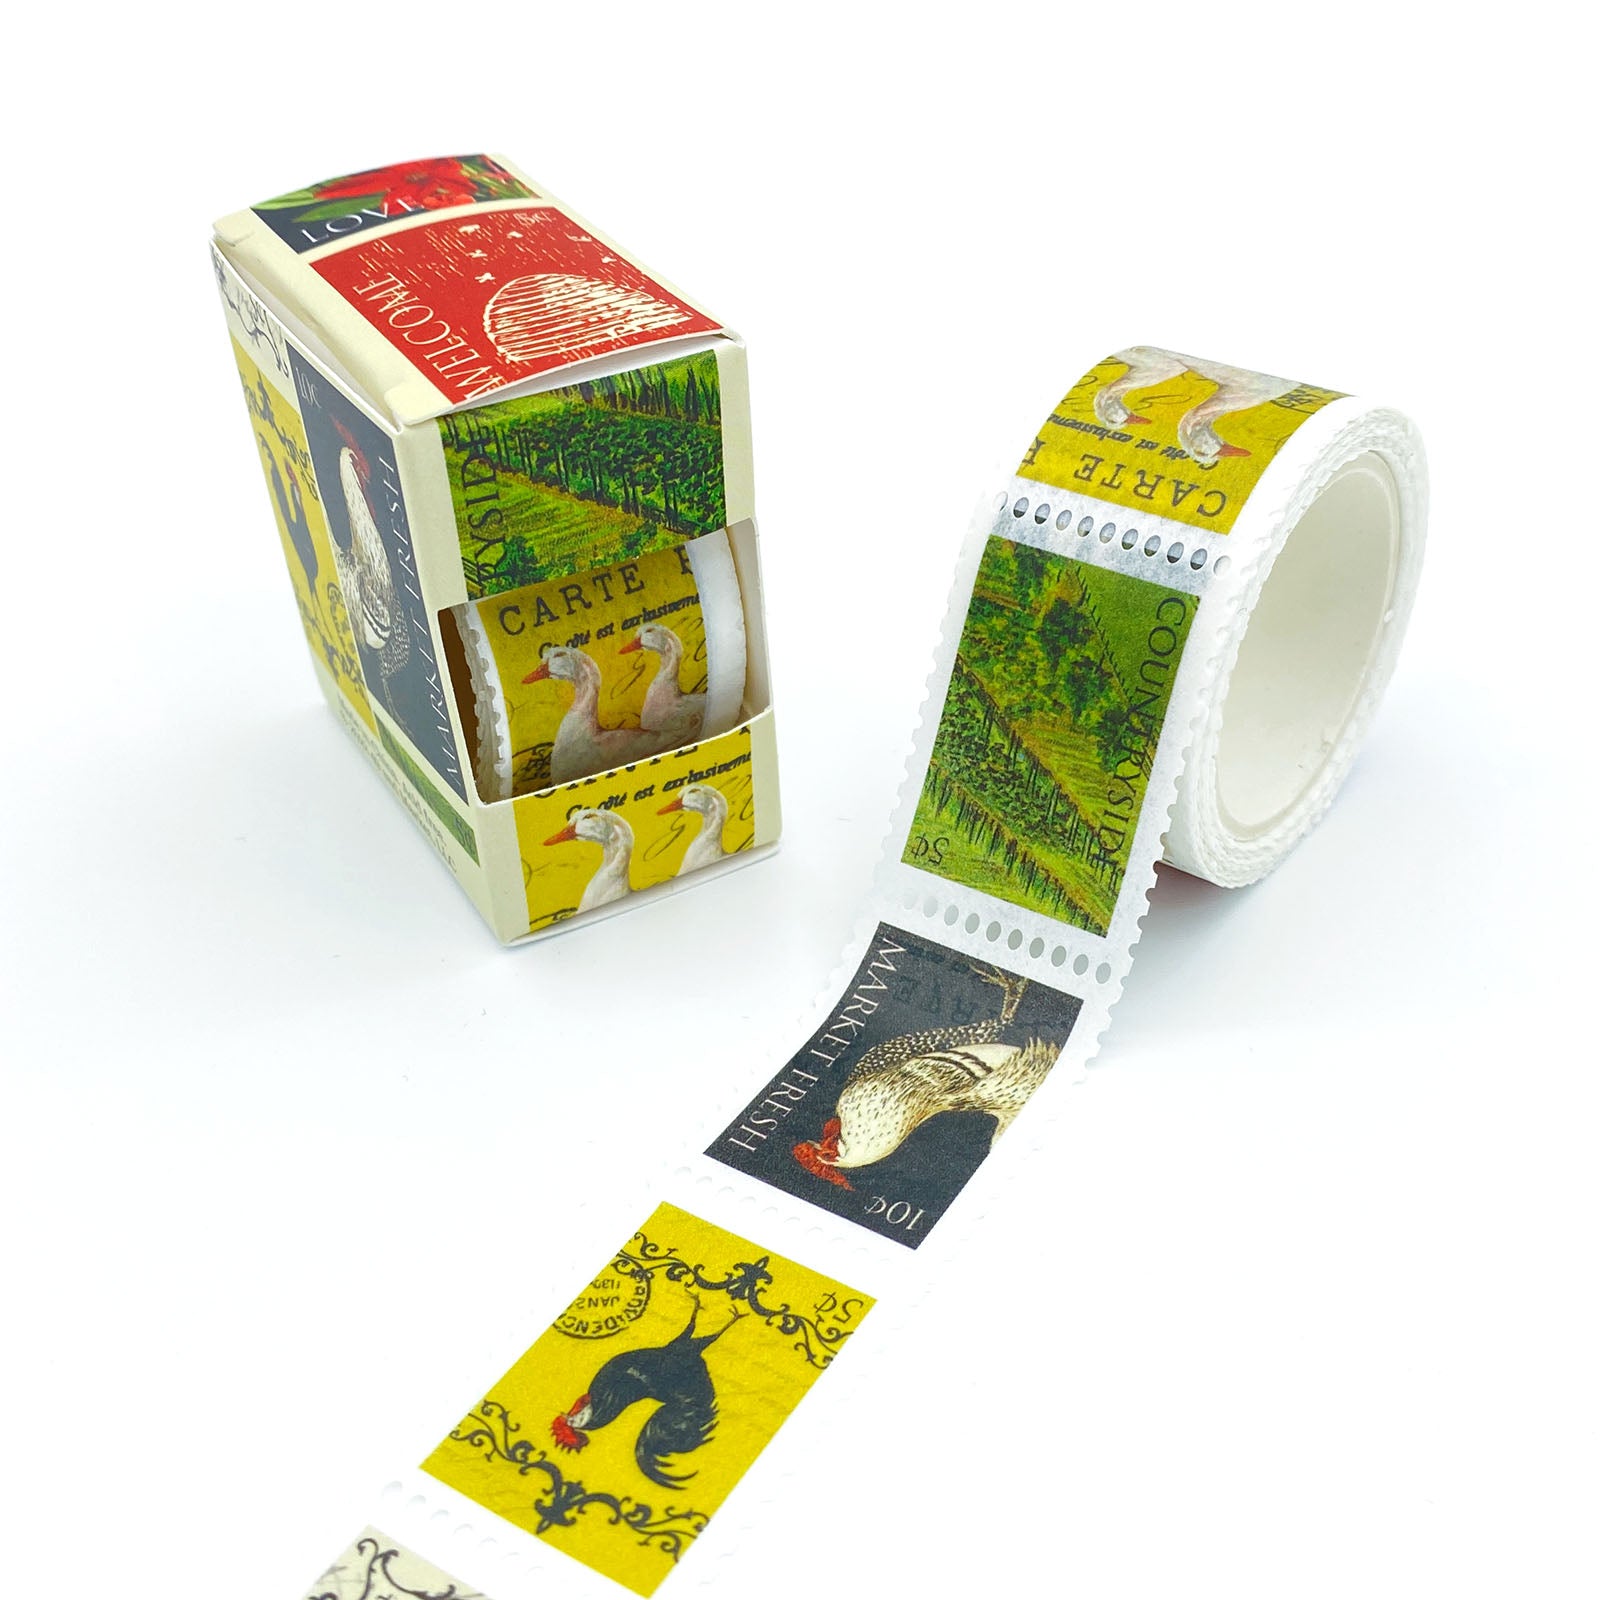 49 and Market-Vintage Artistry-Countryside-Postage stamp washi tape